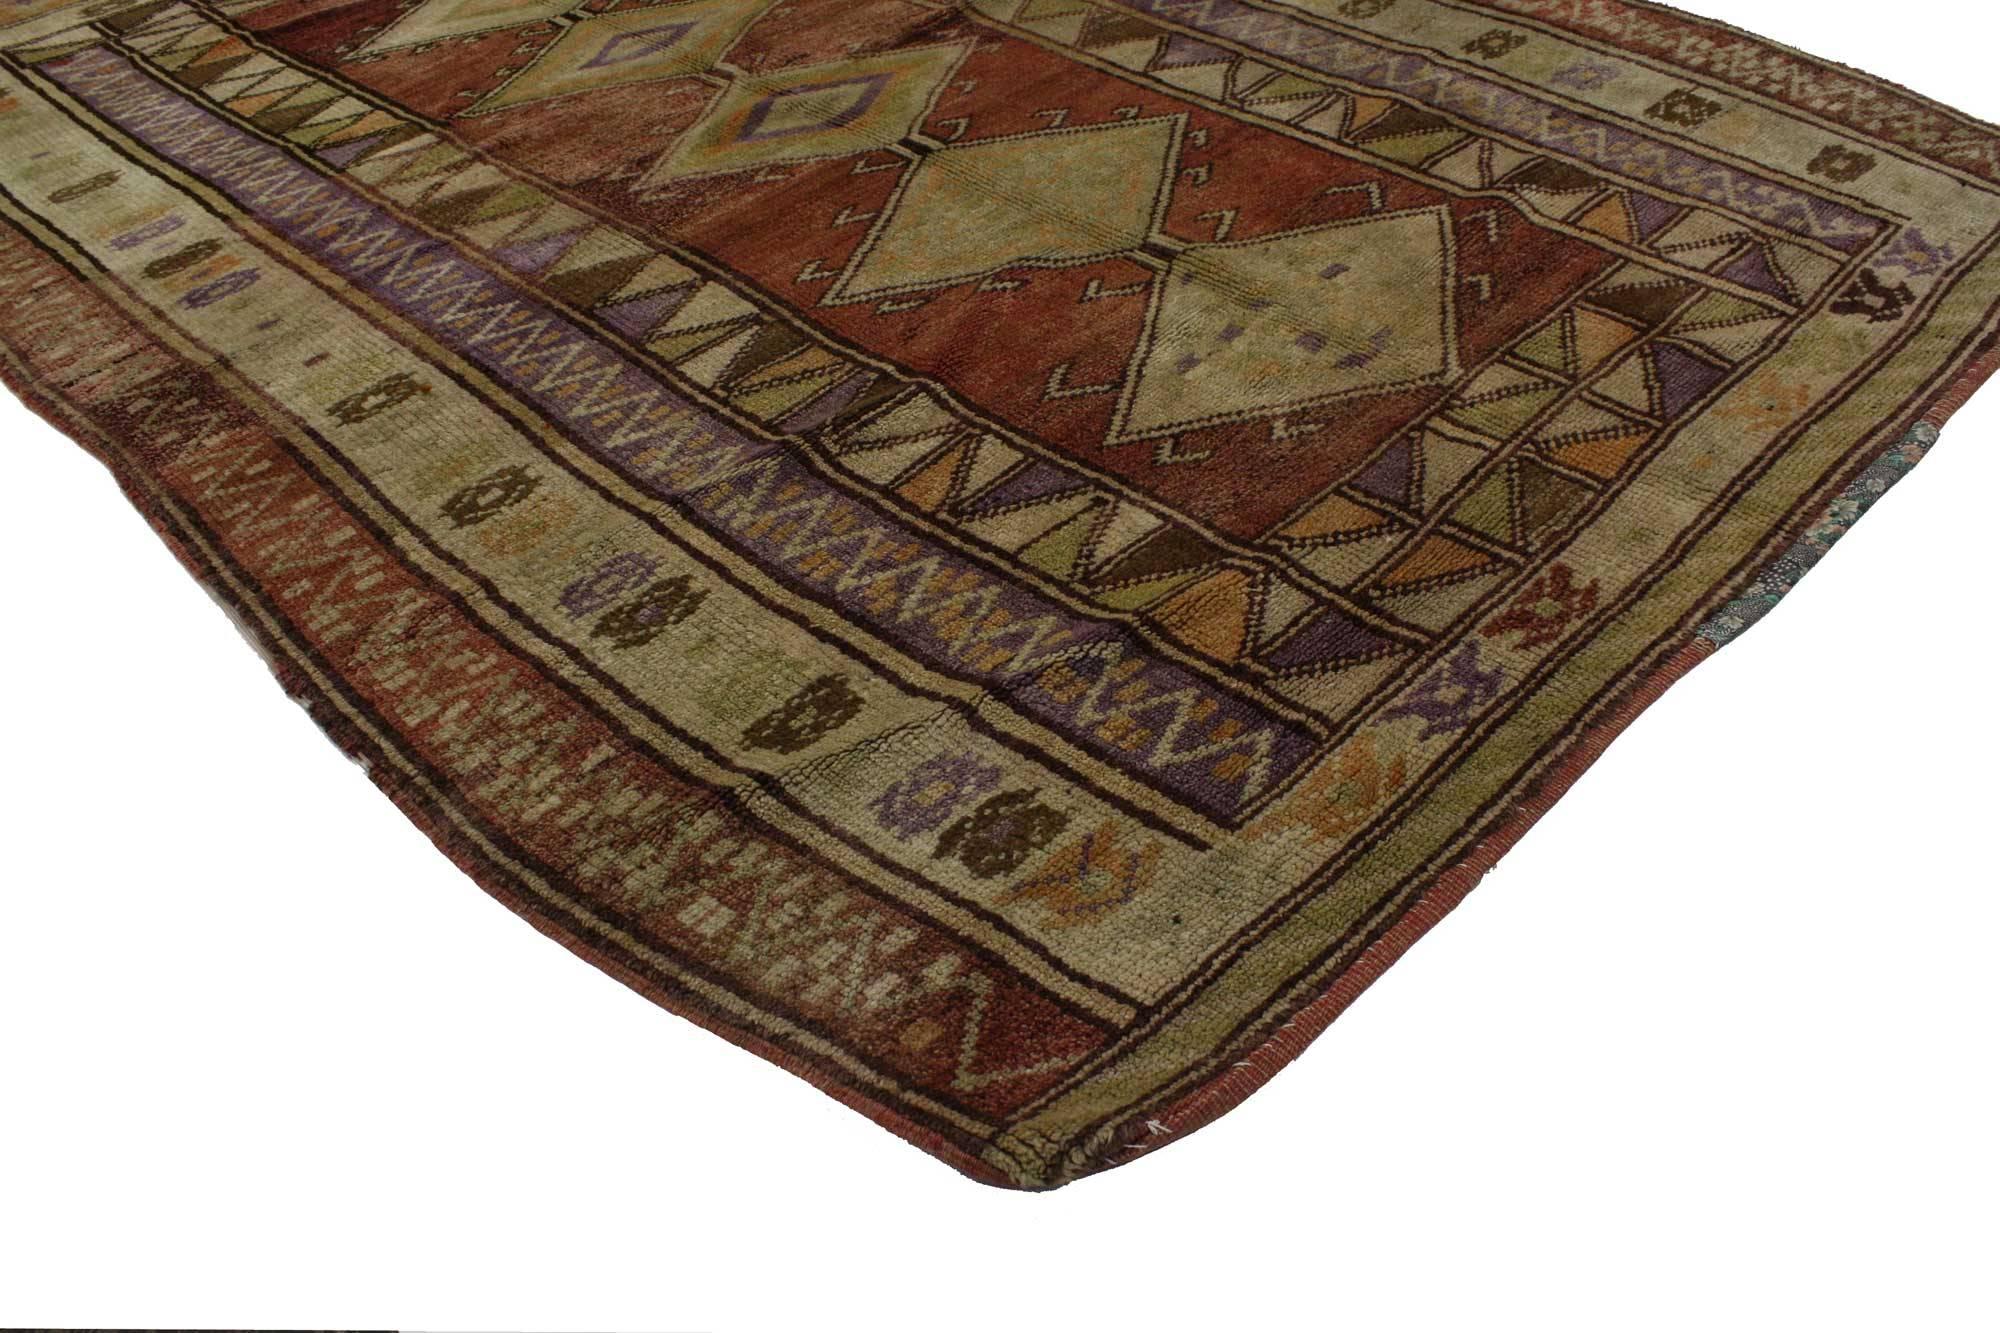 51681, vintage Turkish Oushak rug with tribal Mid-Century Modern style. This hand knotted wool vintage Turkish Oushak rug features five stacked hooked diamond-shaped pole medallions spread across an abrashed maroon field. A wonderful series of